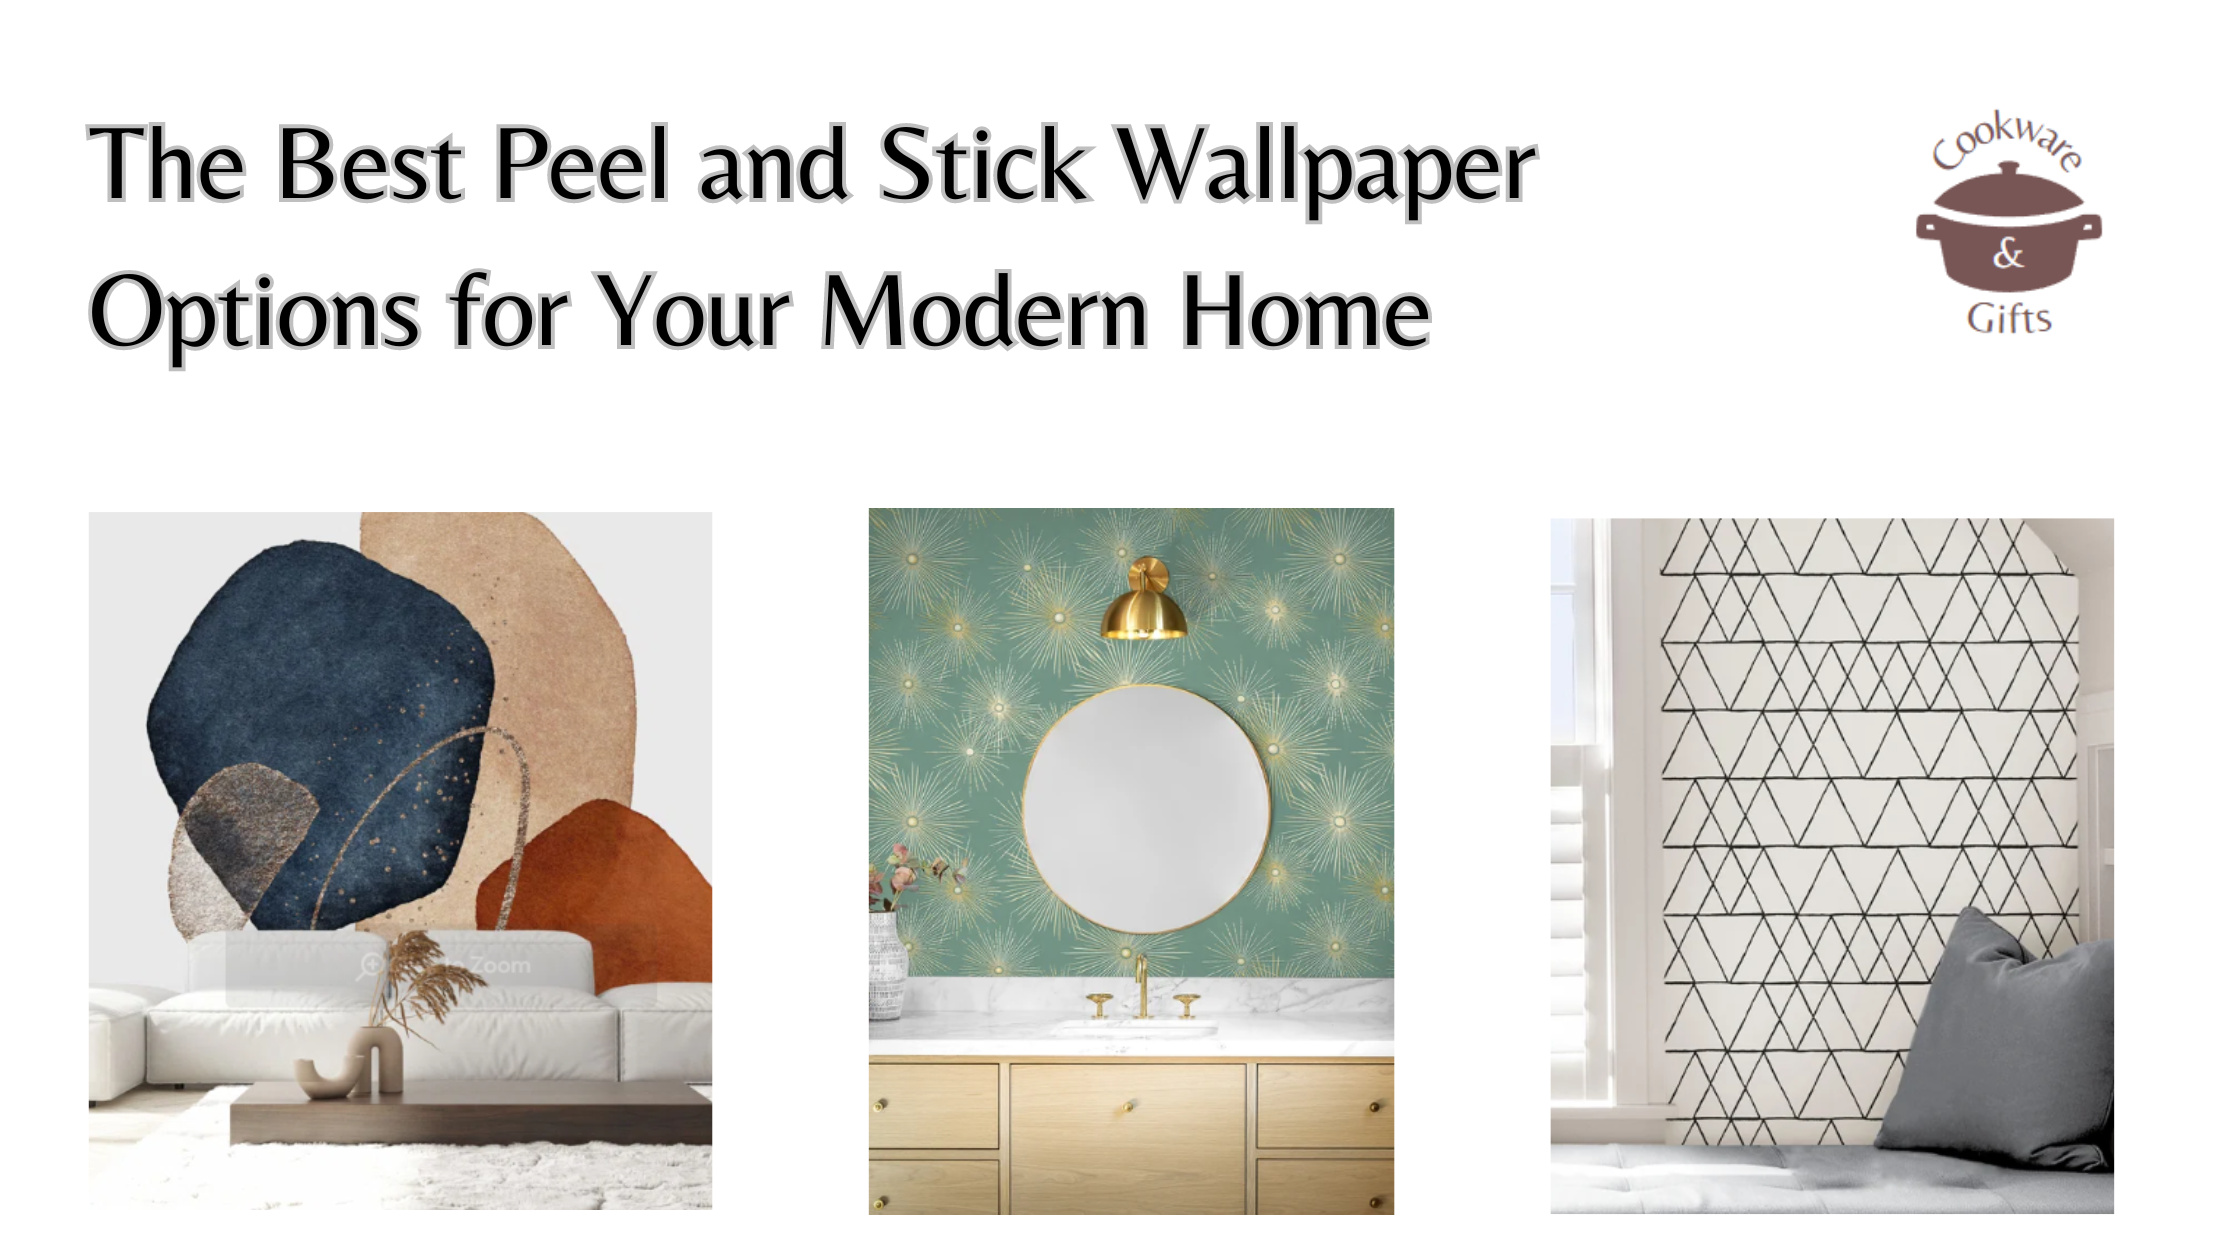 The Best Peel and Stick Wallpaper Options for Your Modern Home